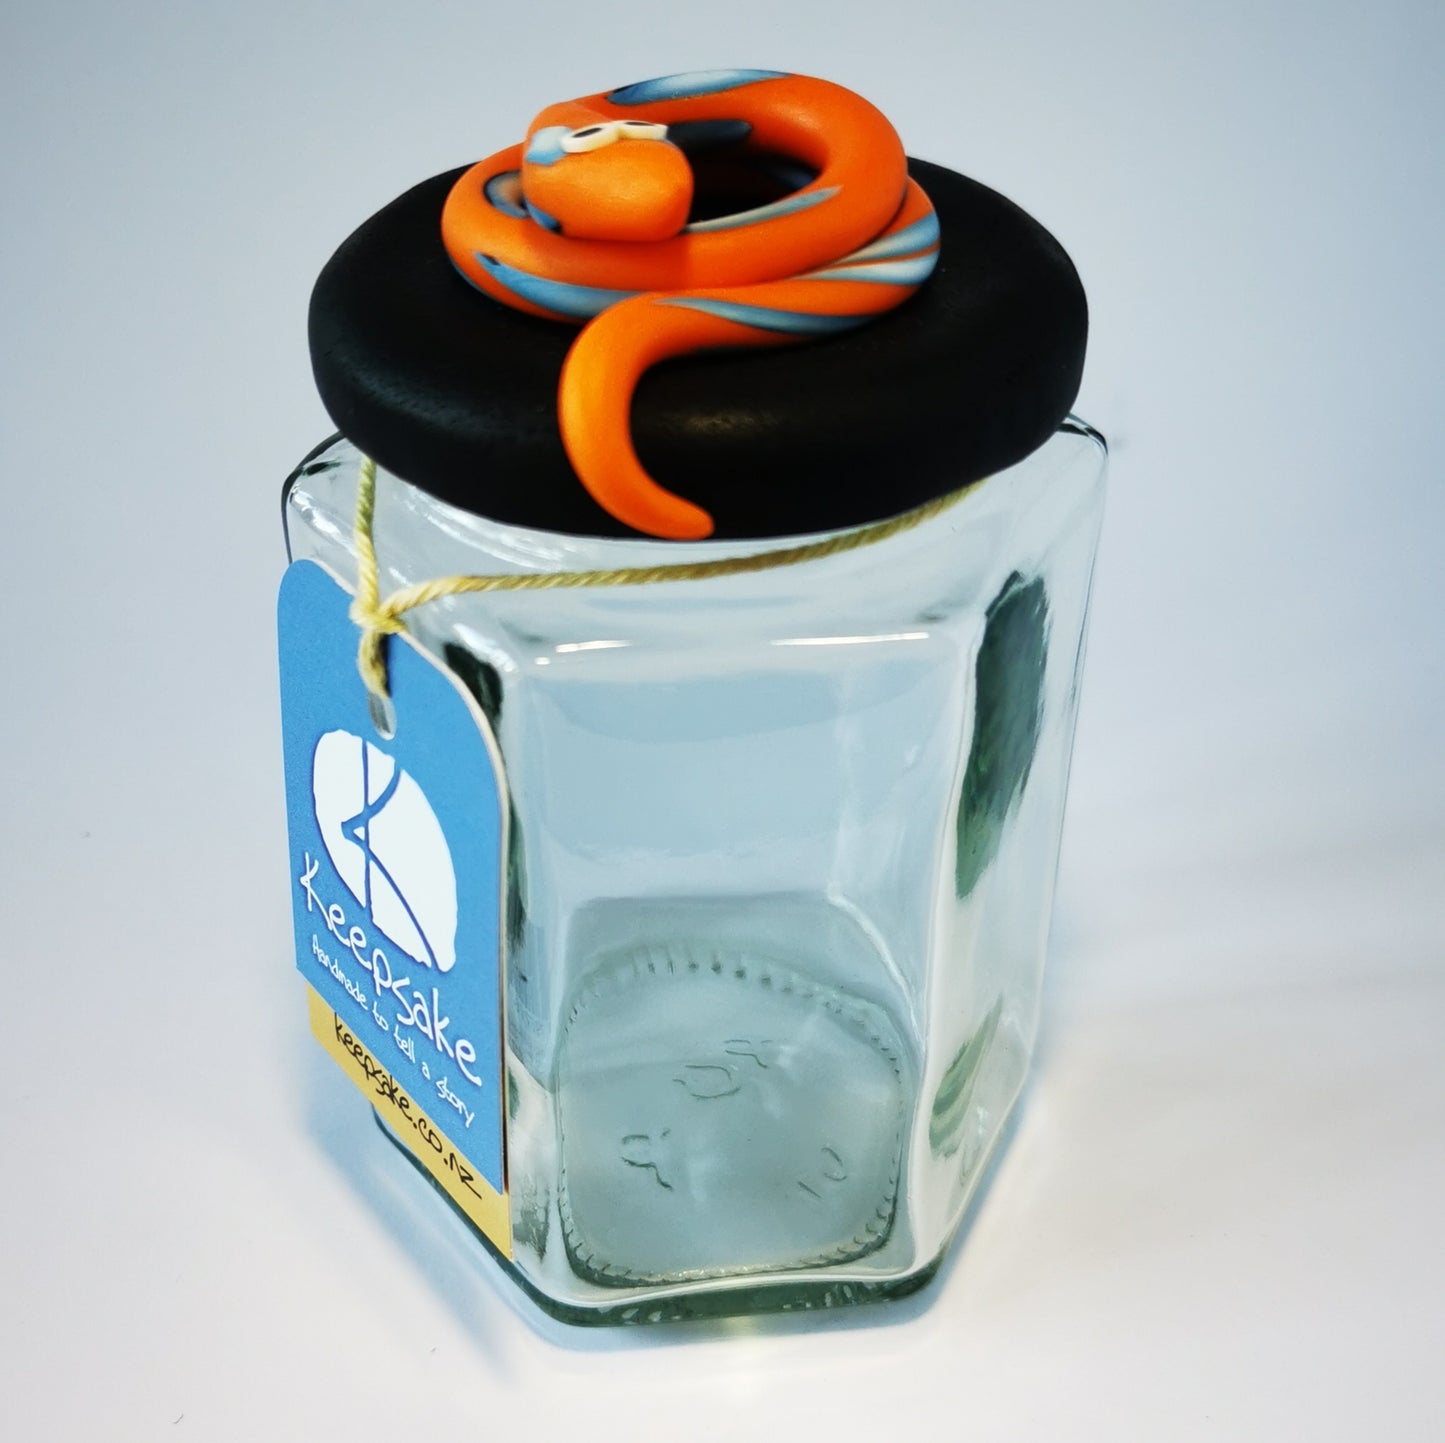 270ml glass hexagonal  jar and lid hand-decorated in New Zealand, with  an air-tight lid decorated with an orange snake. Ready to be filled with jelly snakes, sweets or other treasures.